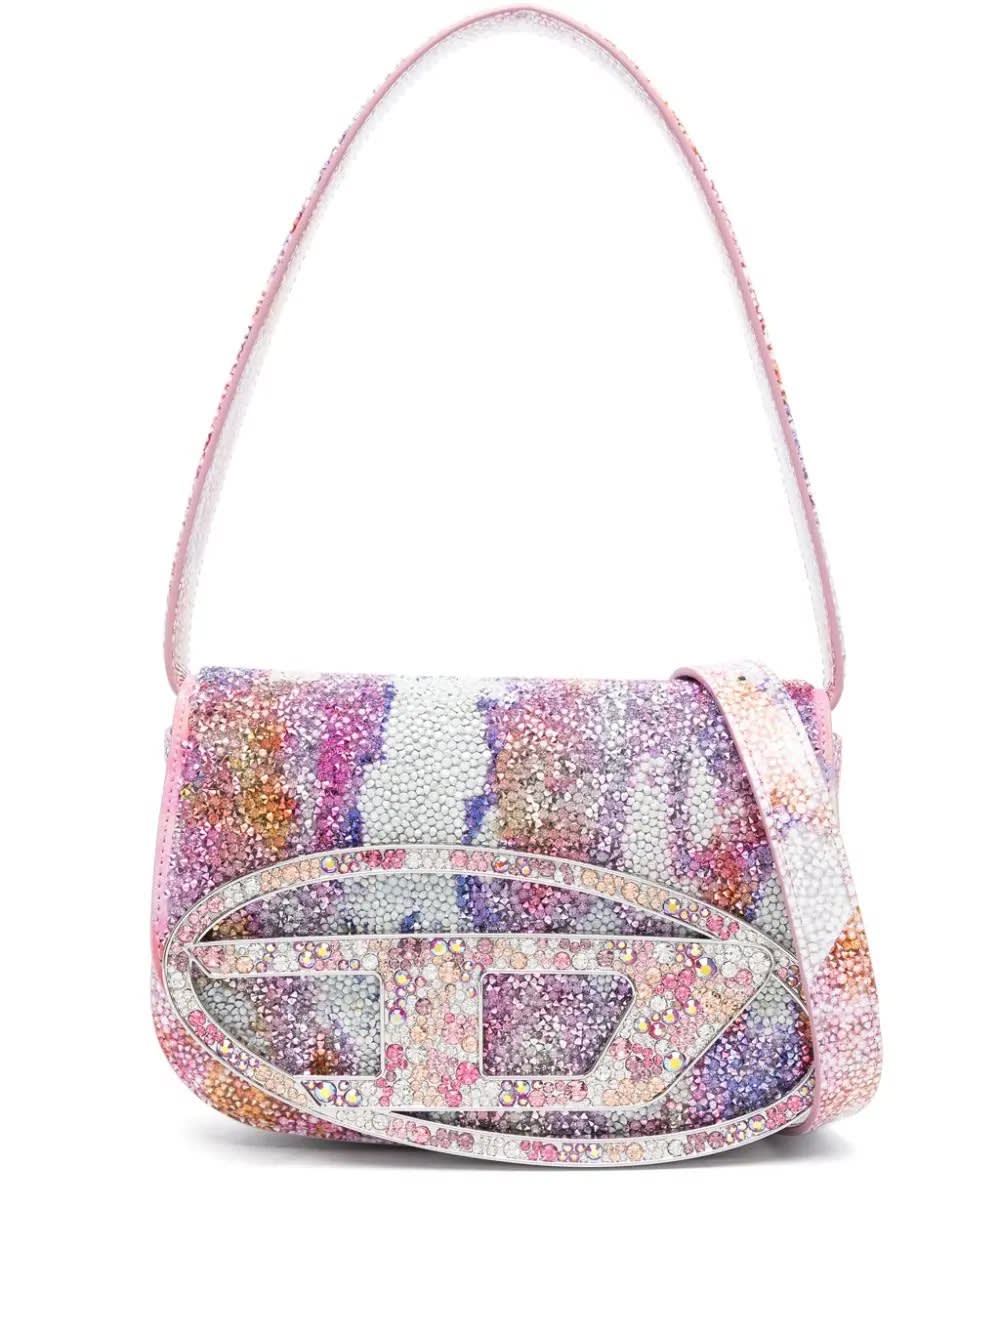 Diesel 1dr Tote Bag With Multicolored Crystals In Pink